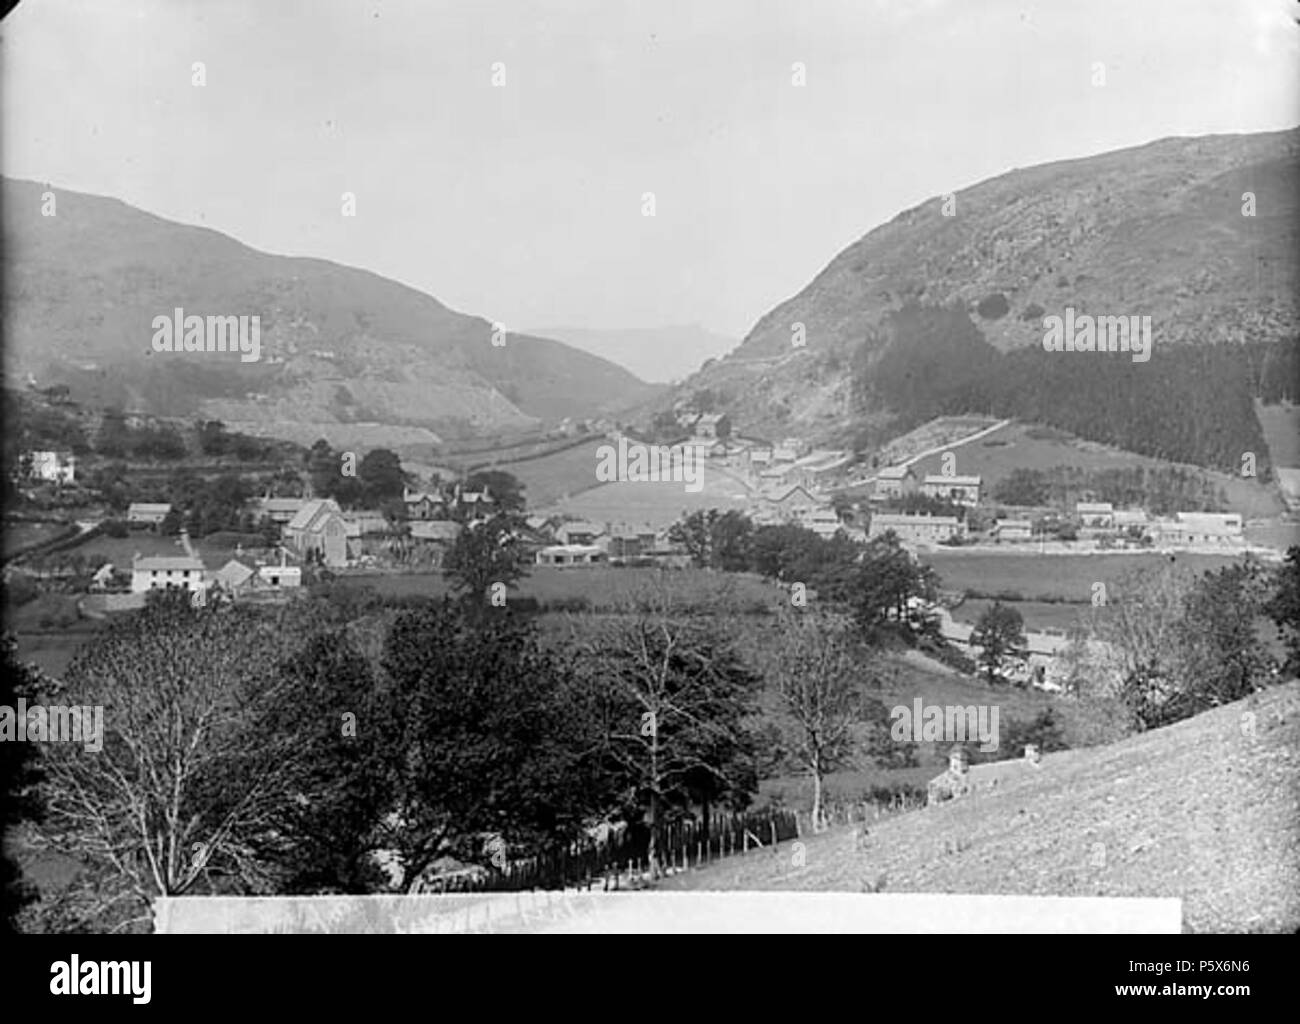 [Corris, with Cadair Idris in the background (1894)] [graphic].. 1 negative : glass, dry plate, b&w ; 12 x 16.5 cm. 1894. Thomas, John, 382 Corris, with Cadair Idris in the background (1894) NLW3362800 Stock Photo